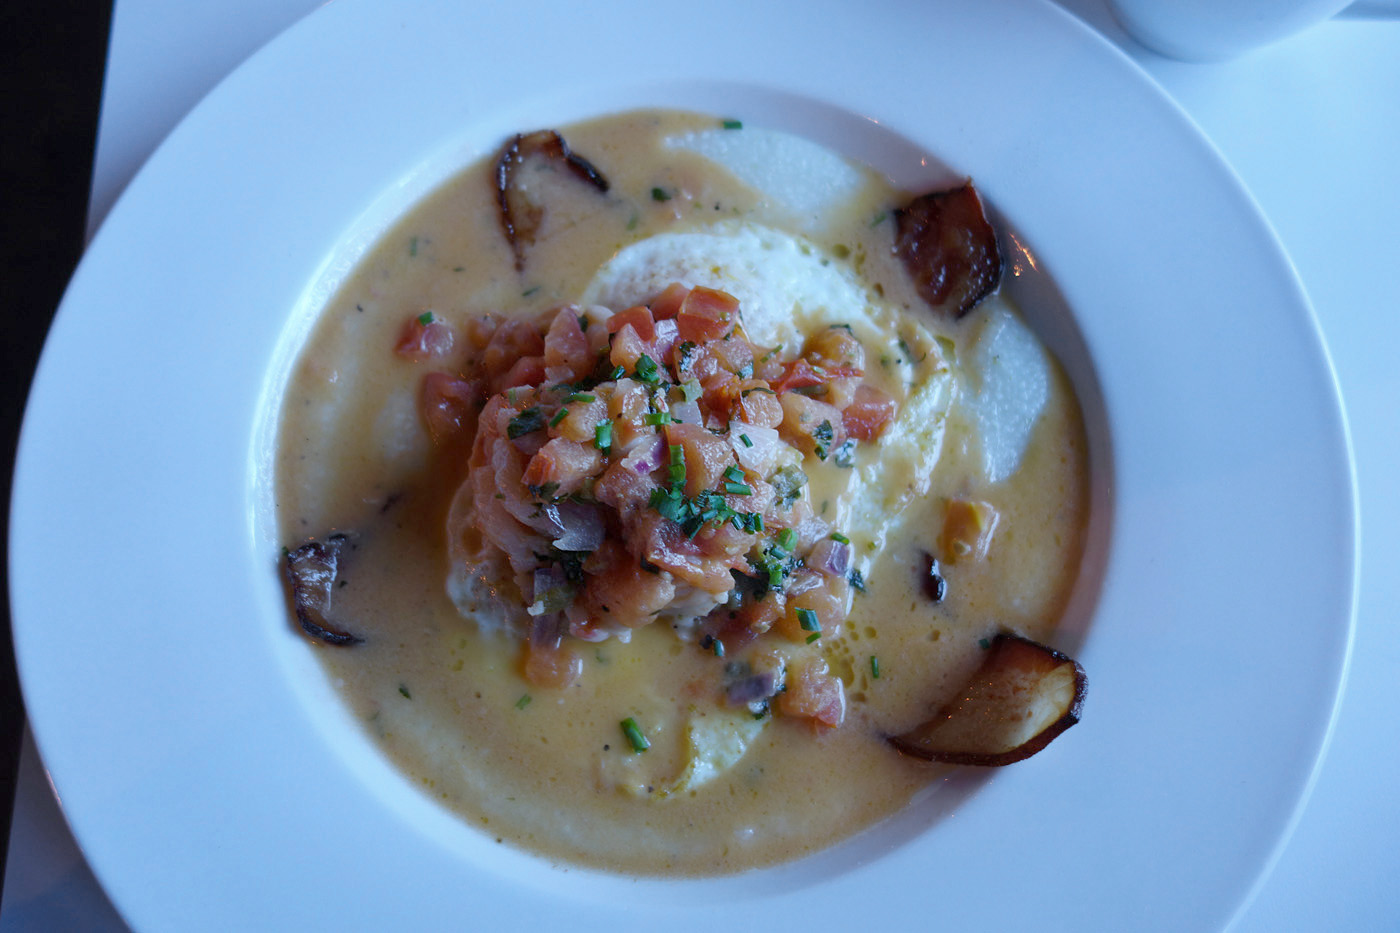 Shrimp and grits, $12.